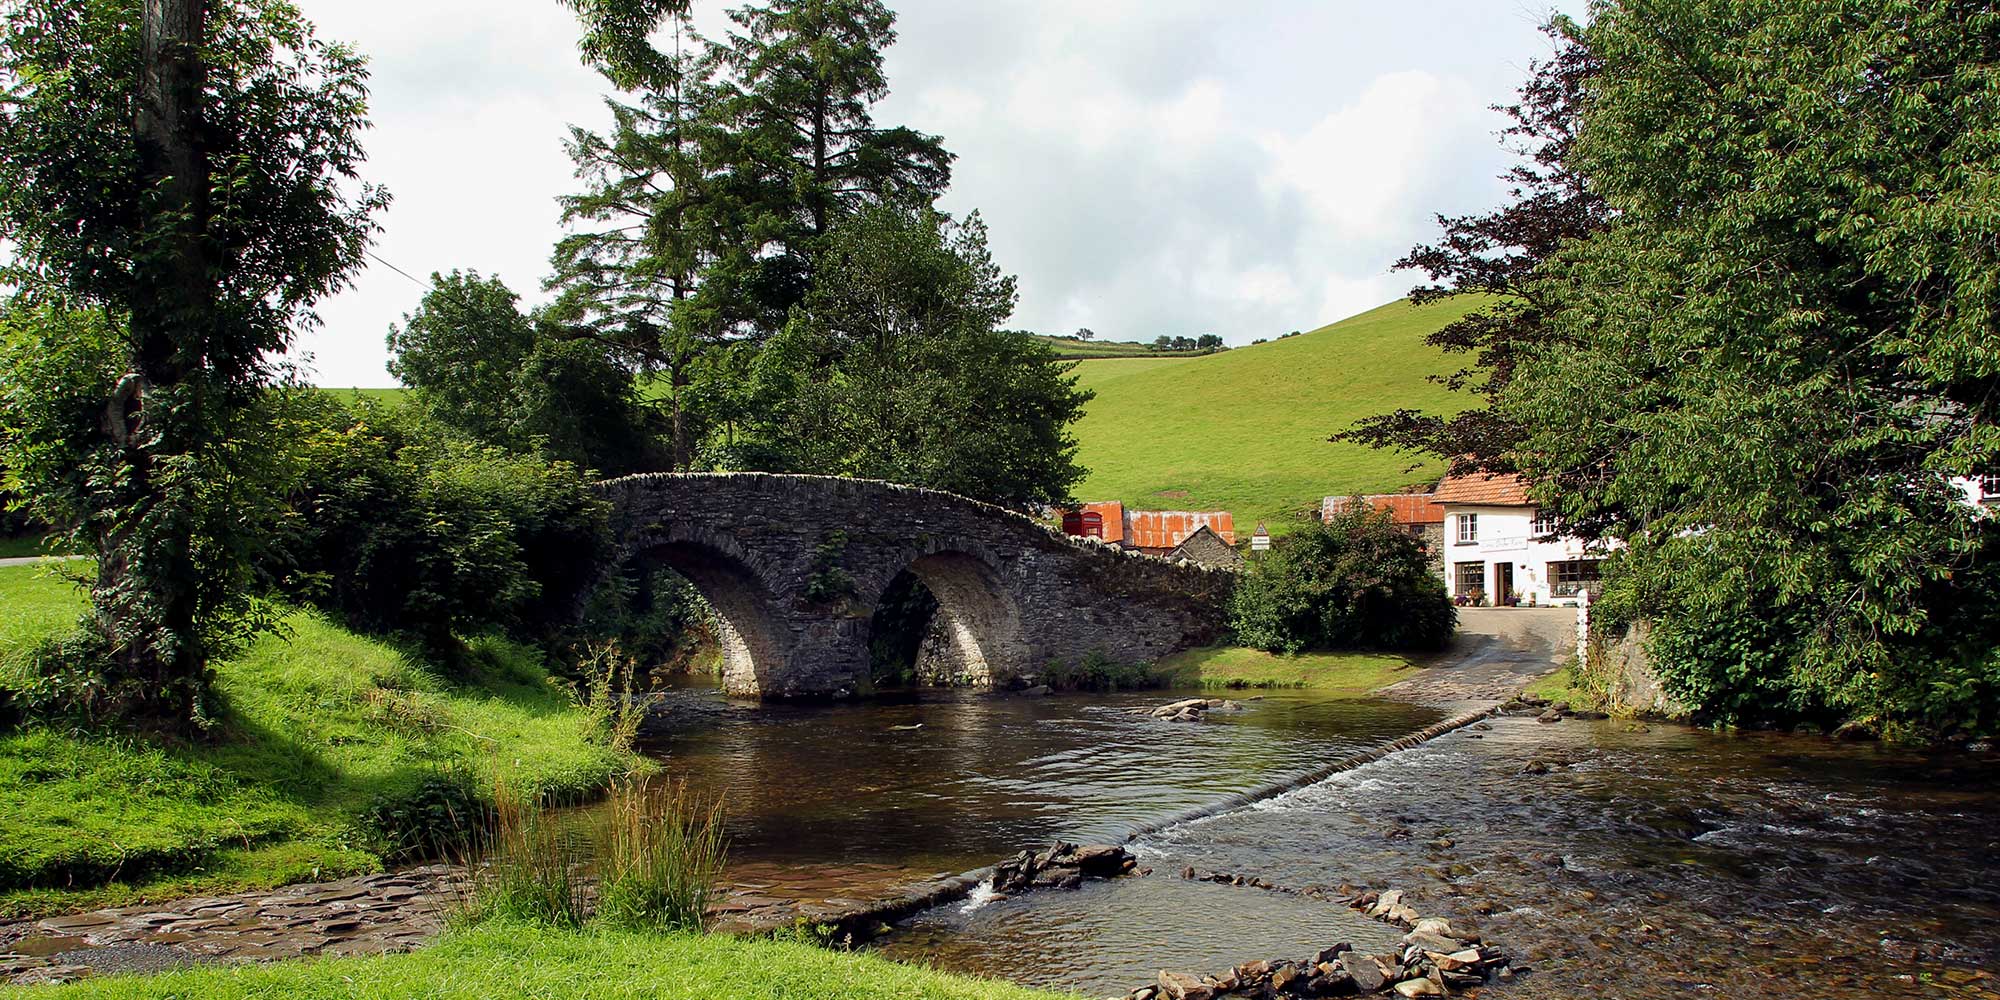 Stone bridge over a river, with a cottage on the far riverbank